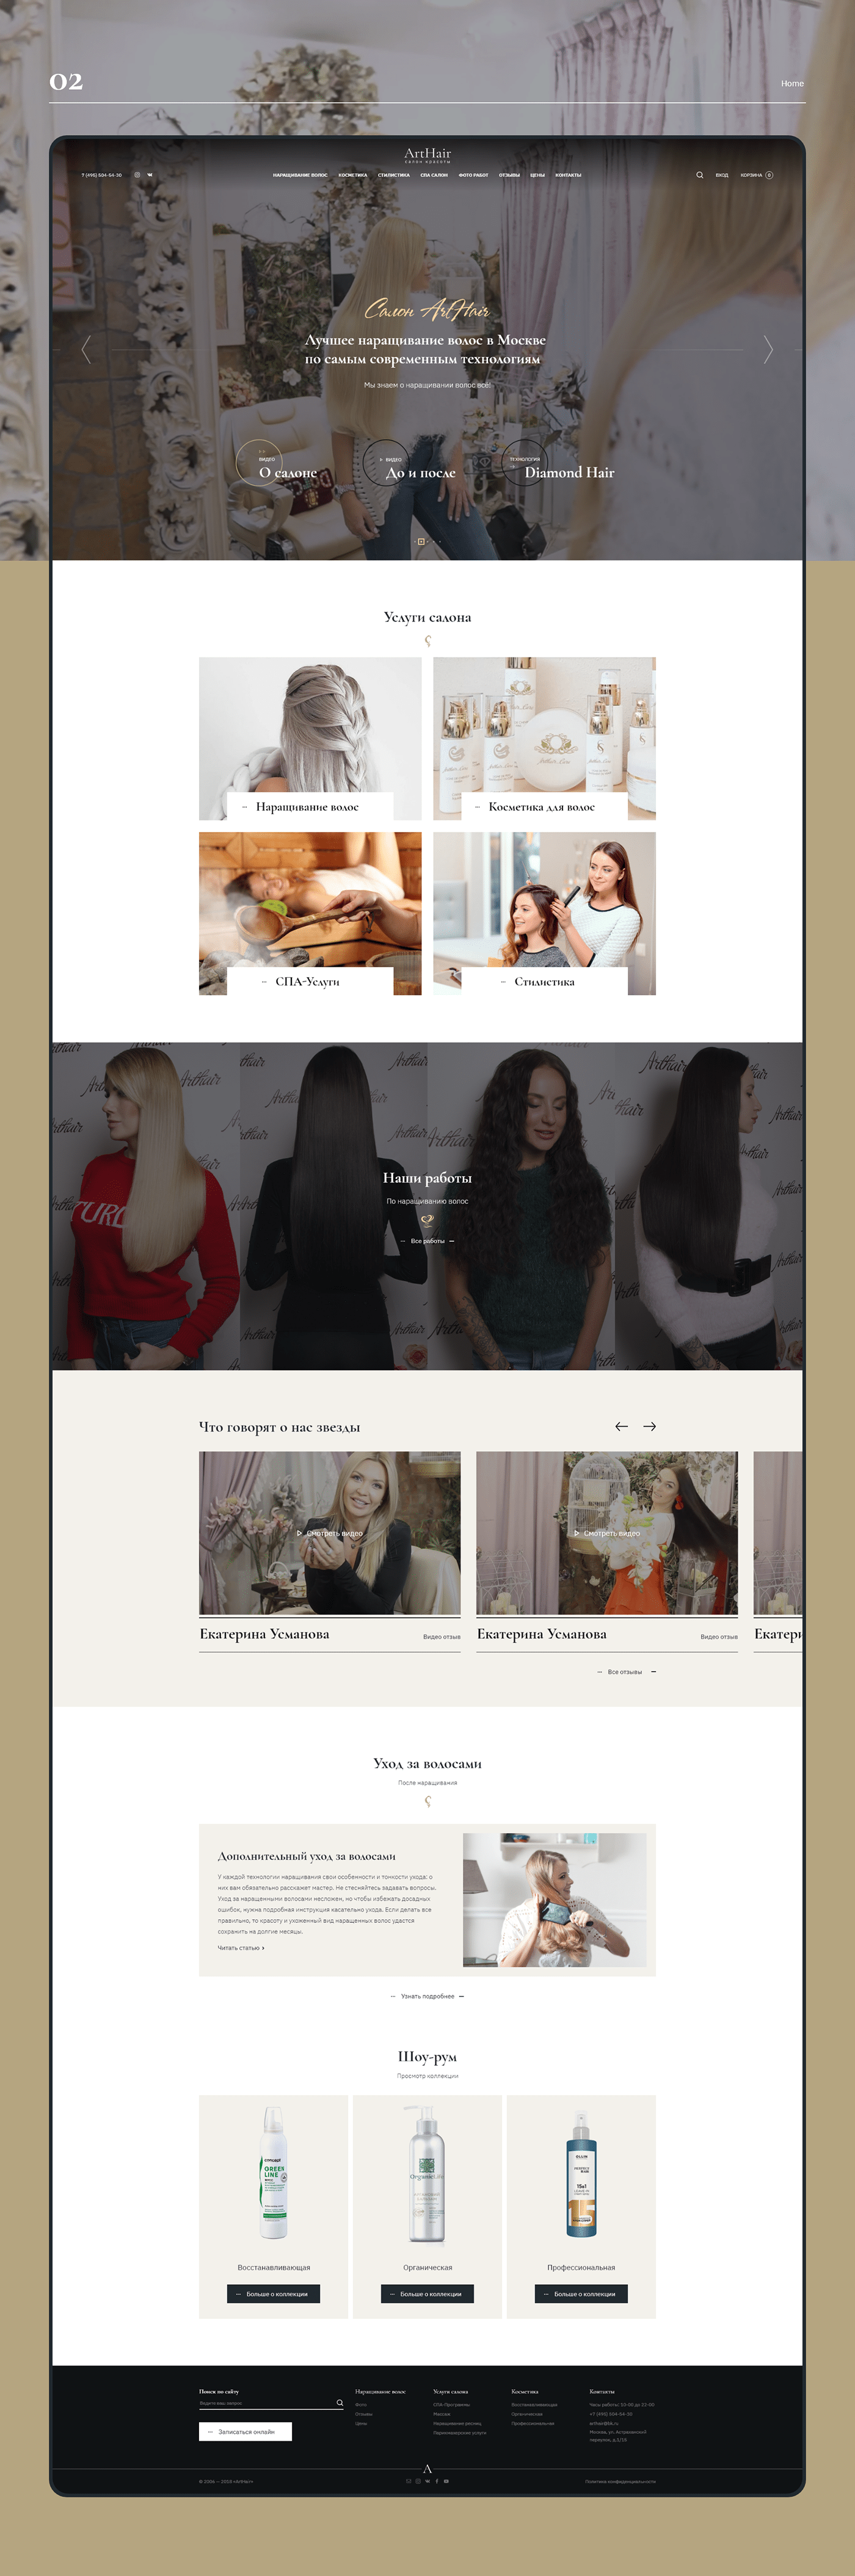 salon beauty redesigned site Website UI/UX Hair Extension